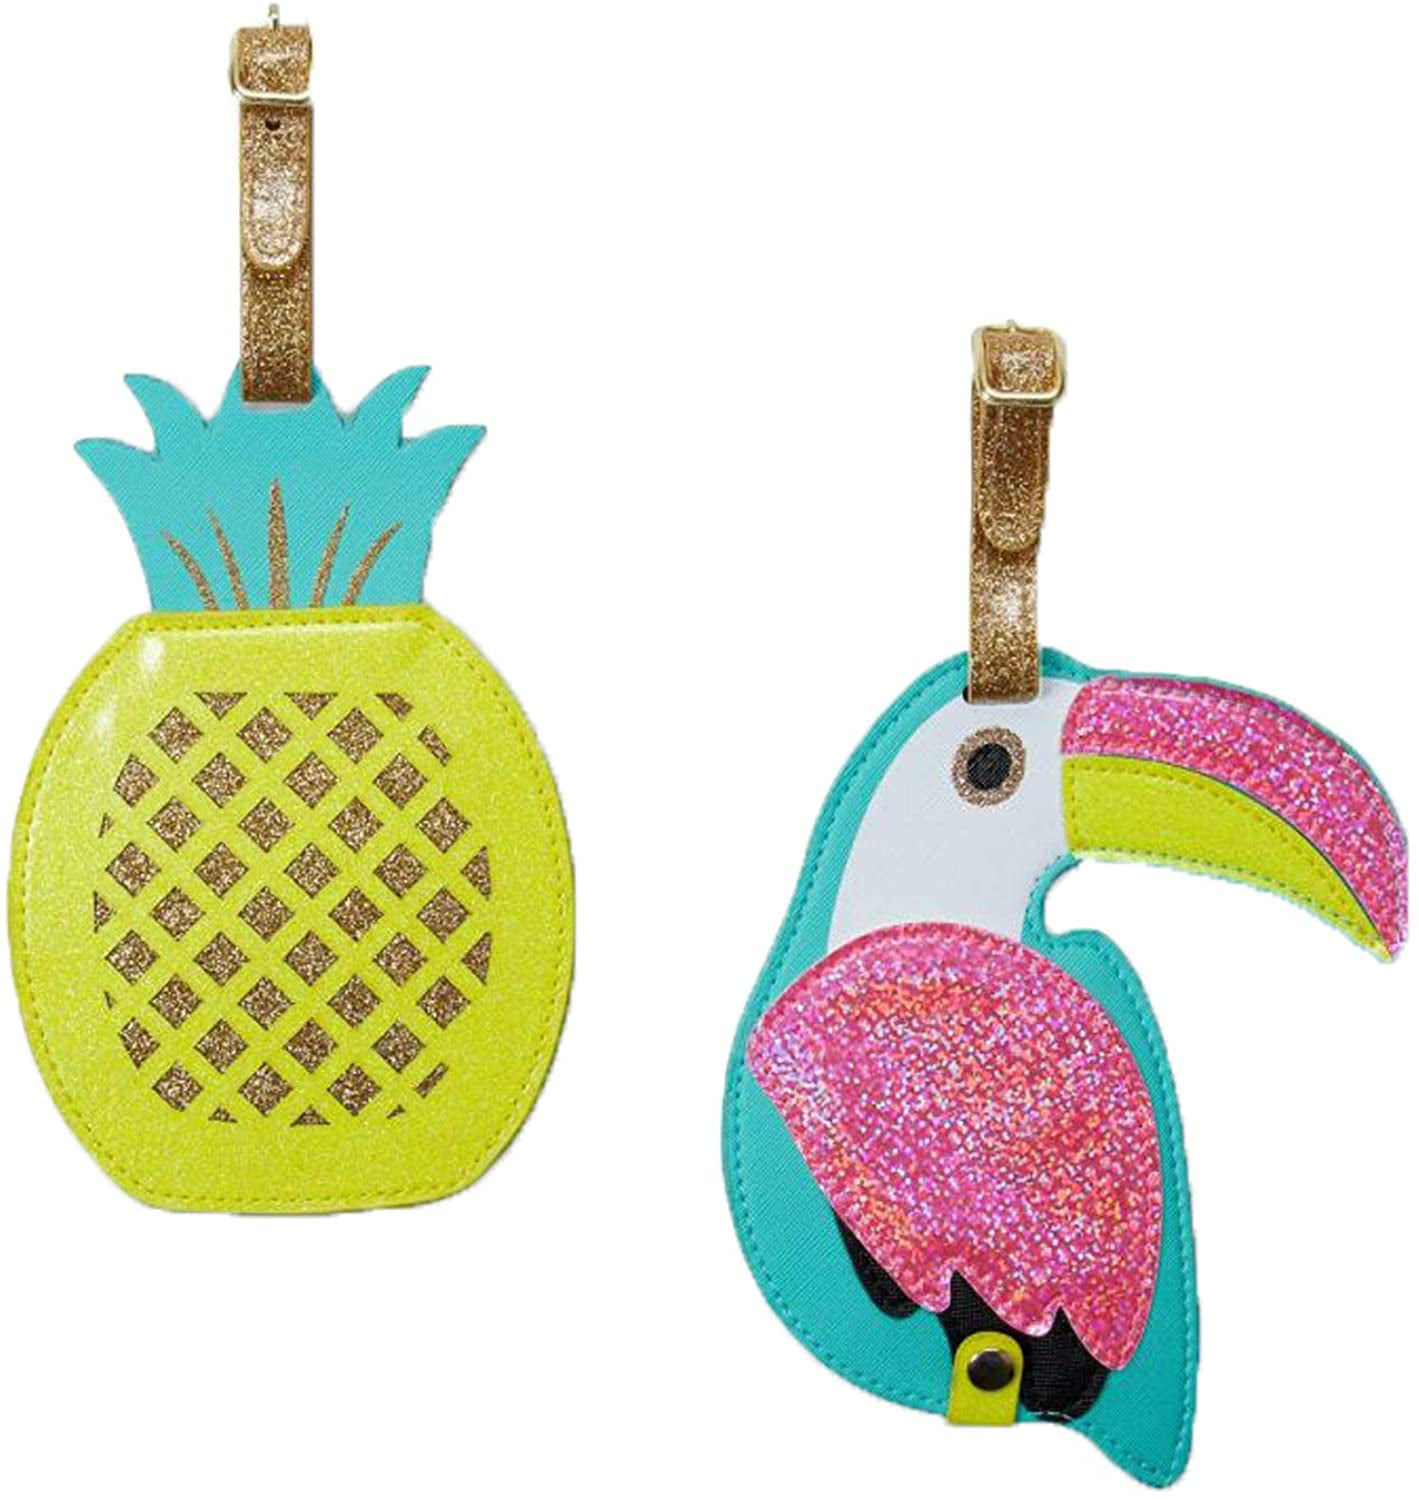 Rainbow Pineapple Luggage Tags Suitcase Labels Bag Travel Accessories Set of 2 